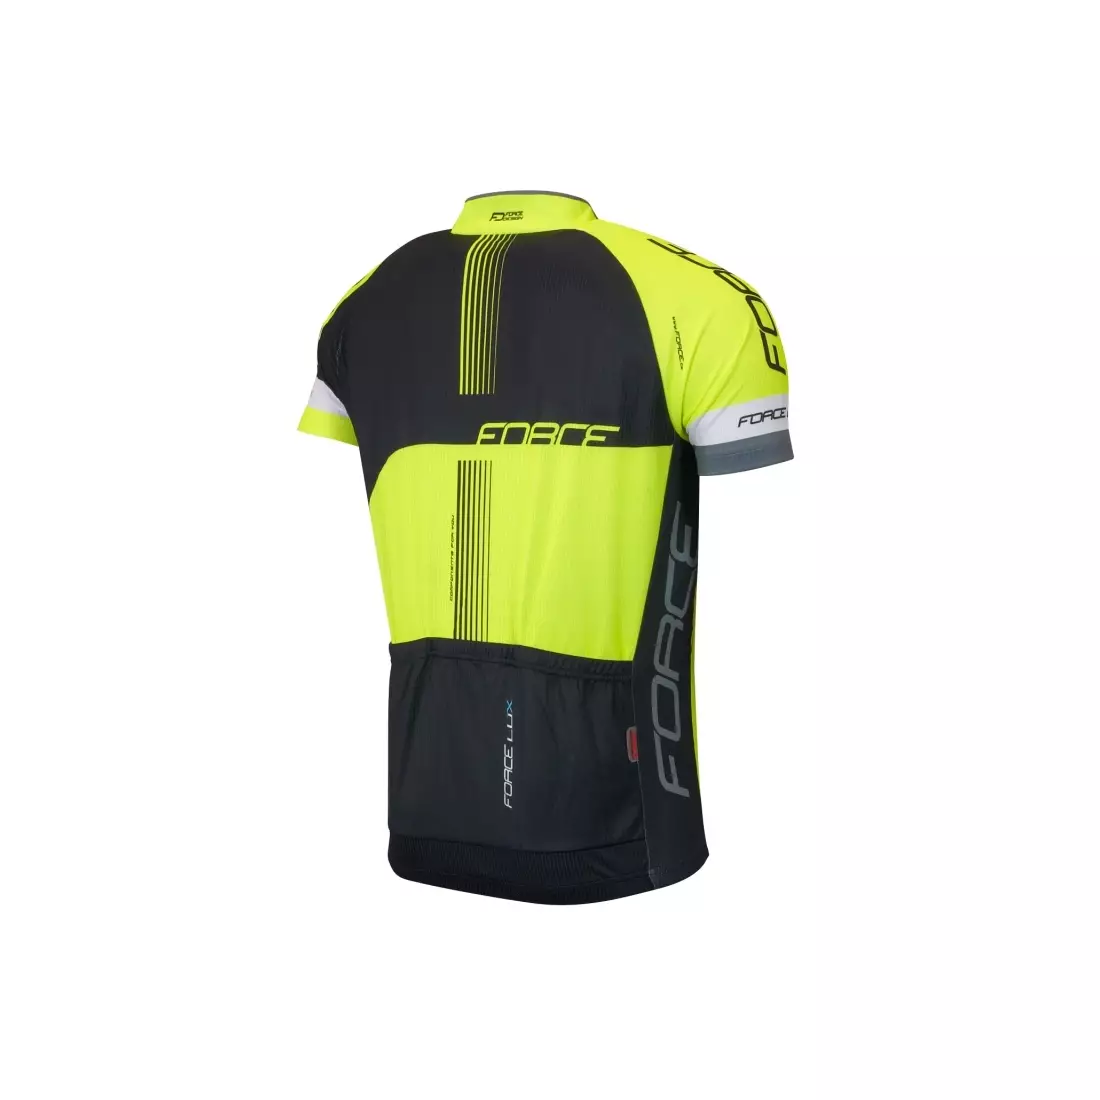 FORCE LUX men's cycling jersey 900131, color: black and fluorine